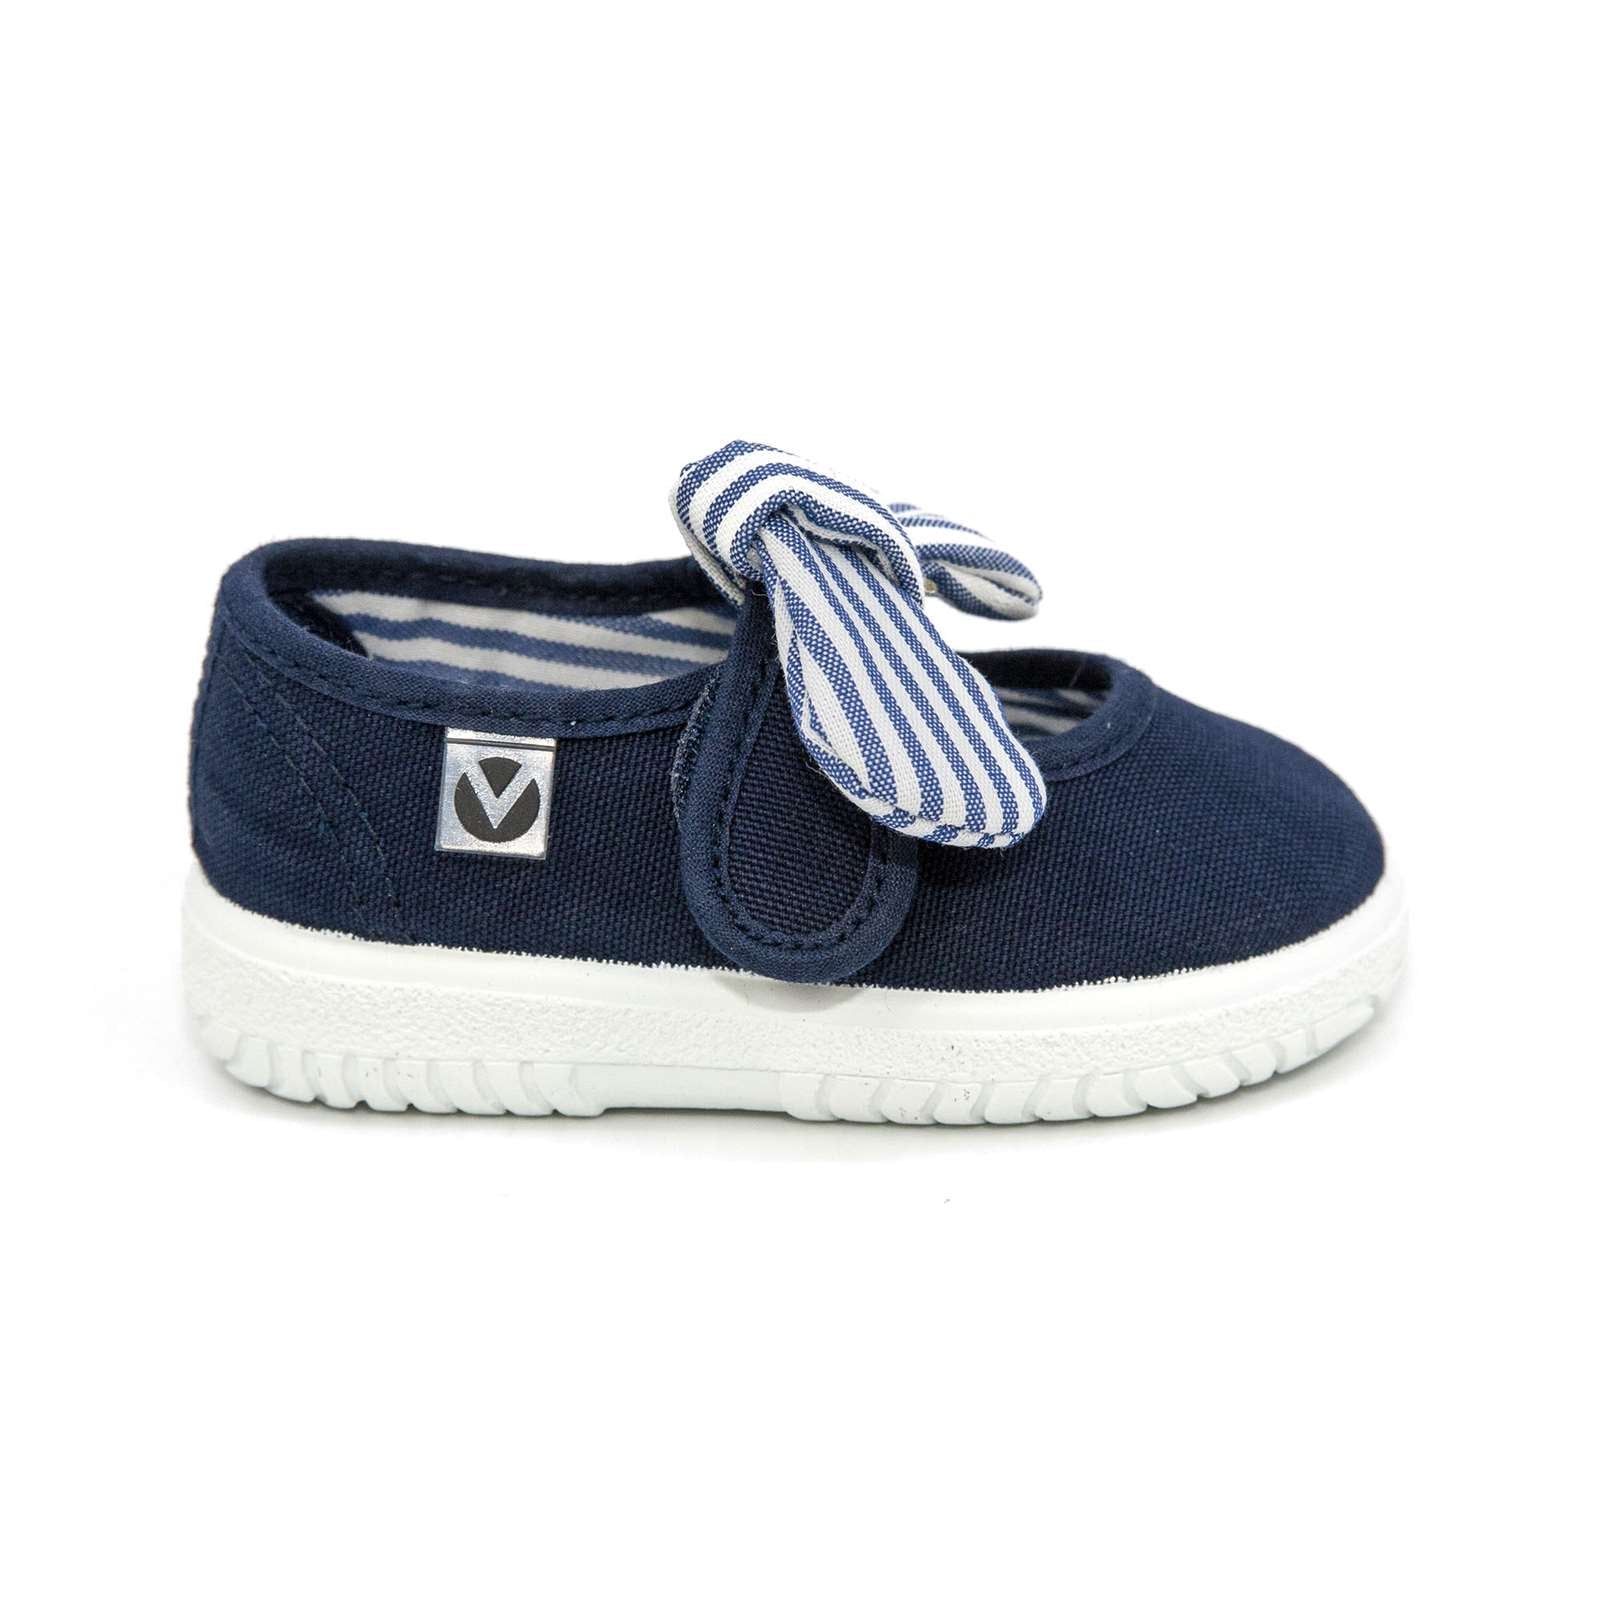 Victoria Toddler Slip On Canvas Bow Shoes